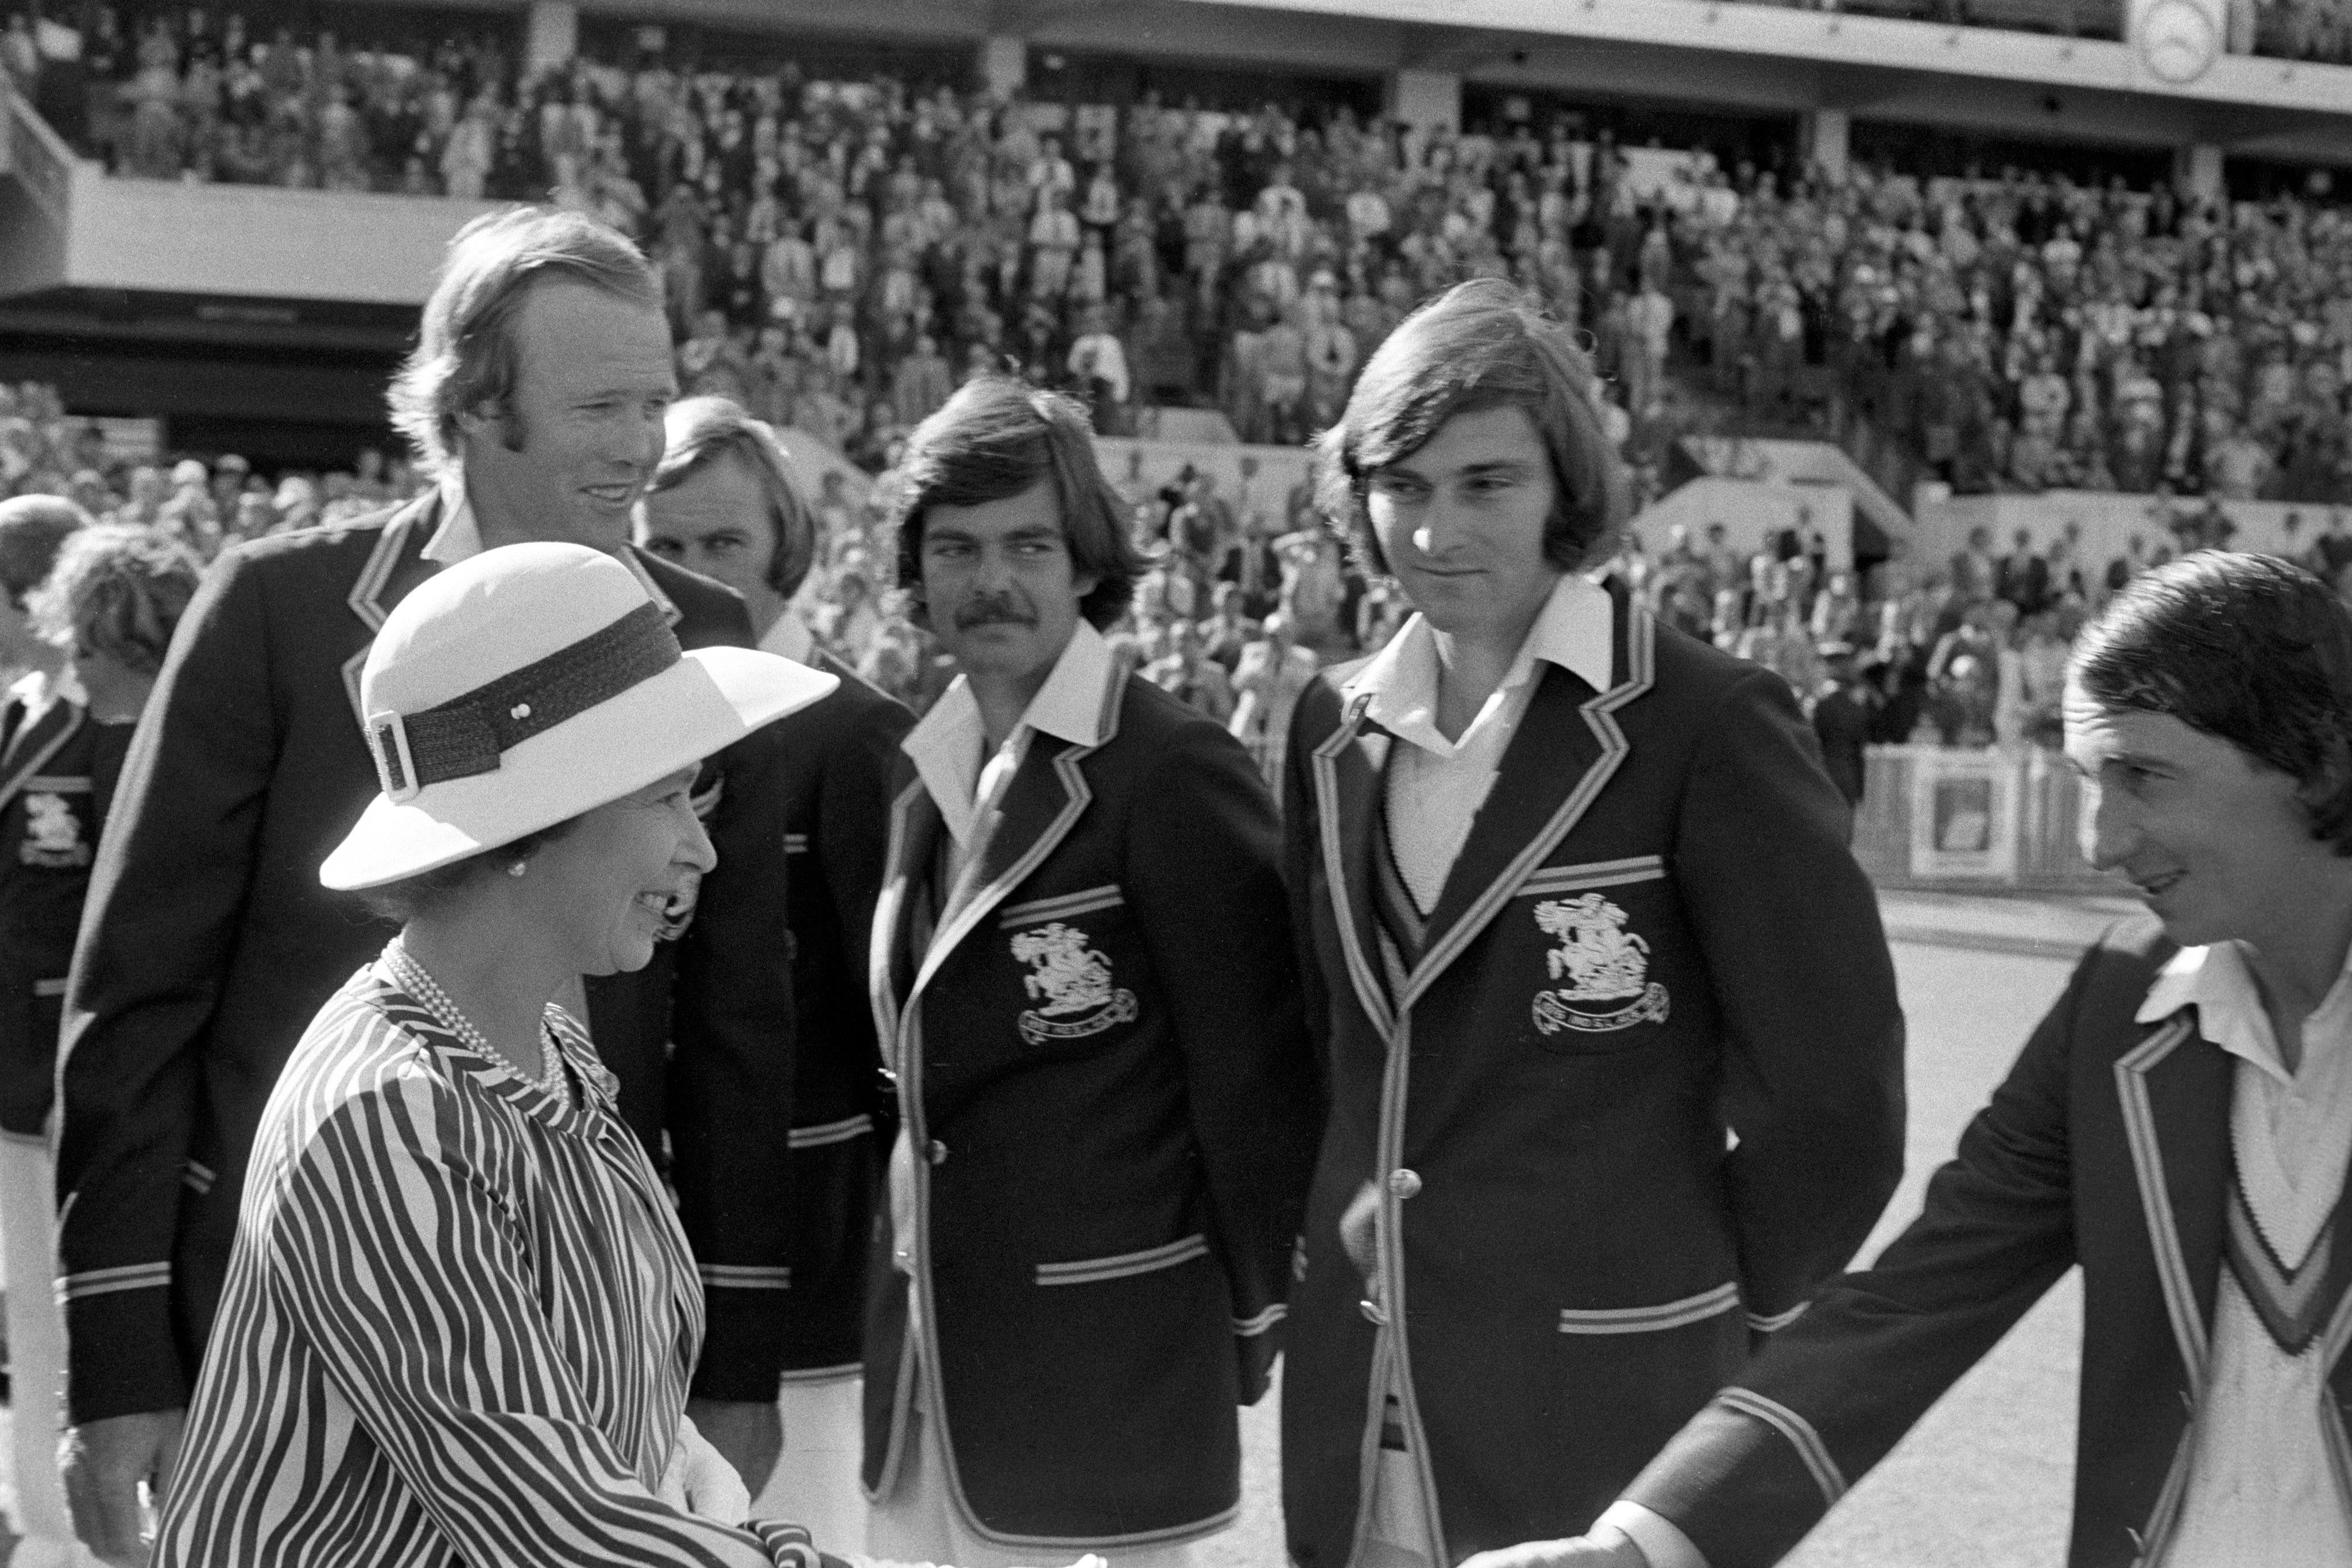 On a tour of Australia, Queen Elizabeth II was introduced to the England cricket team by captain Tony Greig, before the start of the Centenary Test against Australia in Melbourne in 1977 (PA Archive)